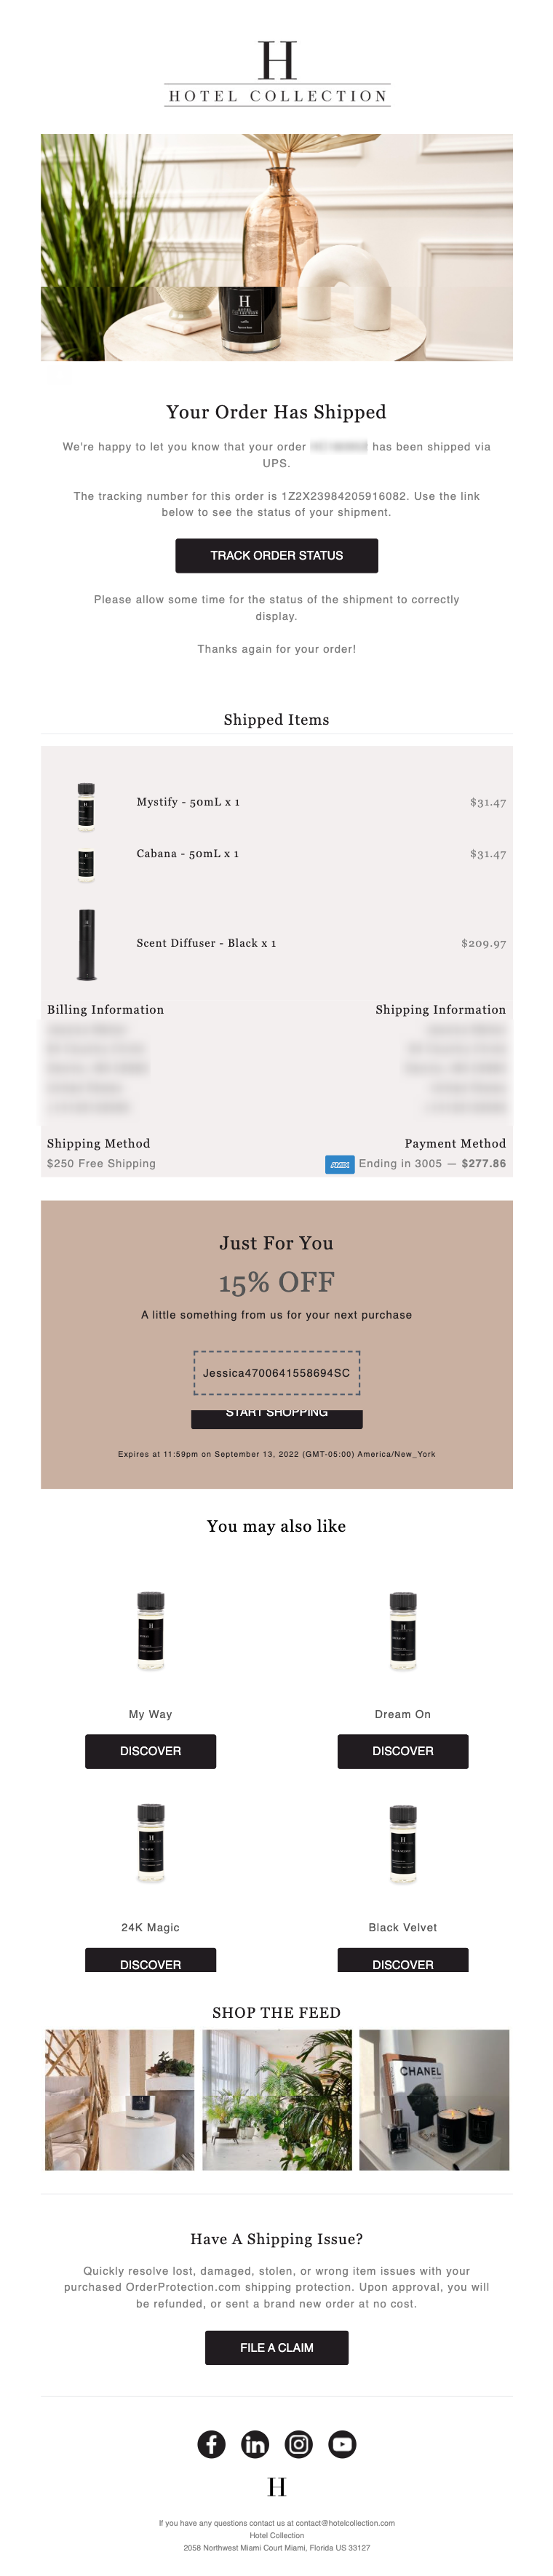 Hotel Collection Shipment Created Industry Email Template screenshot